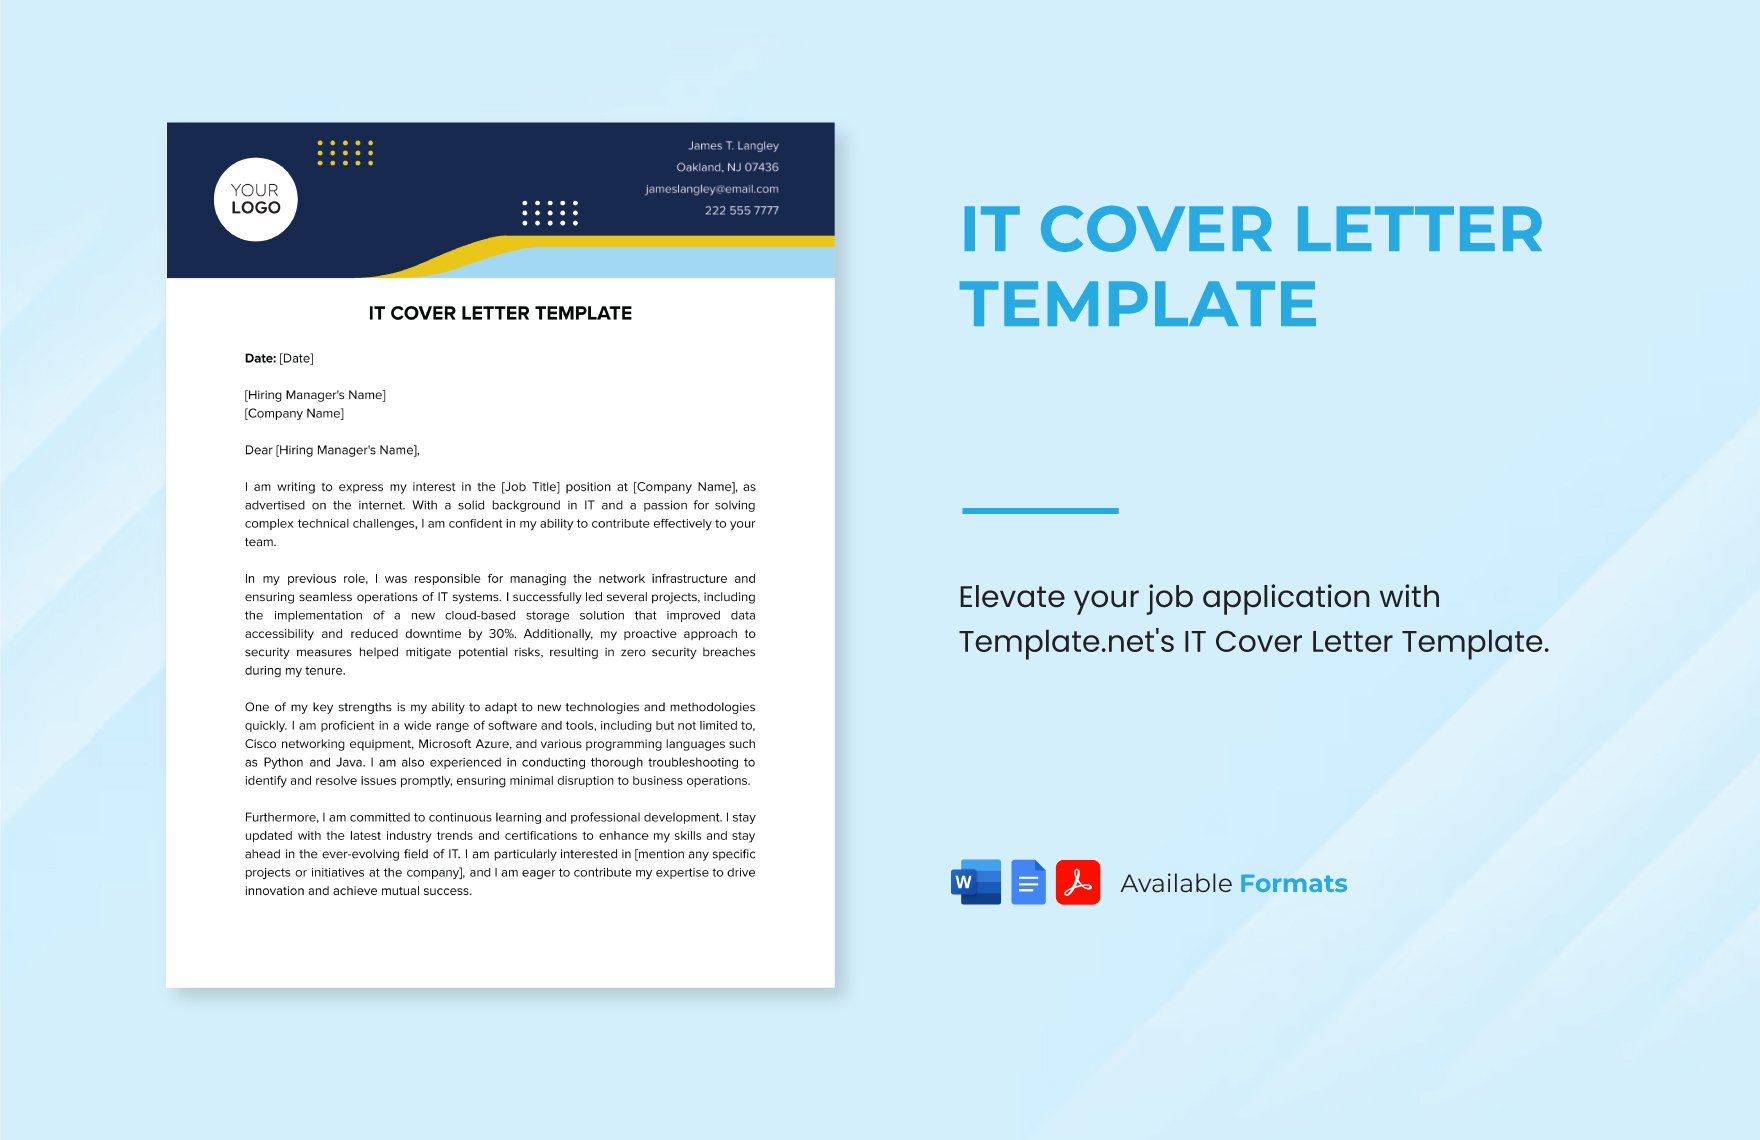 IT Cover Letter Template in Word, Google Docs, PDF